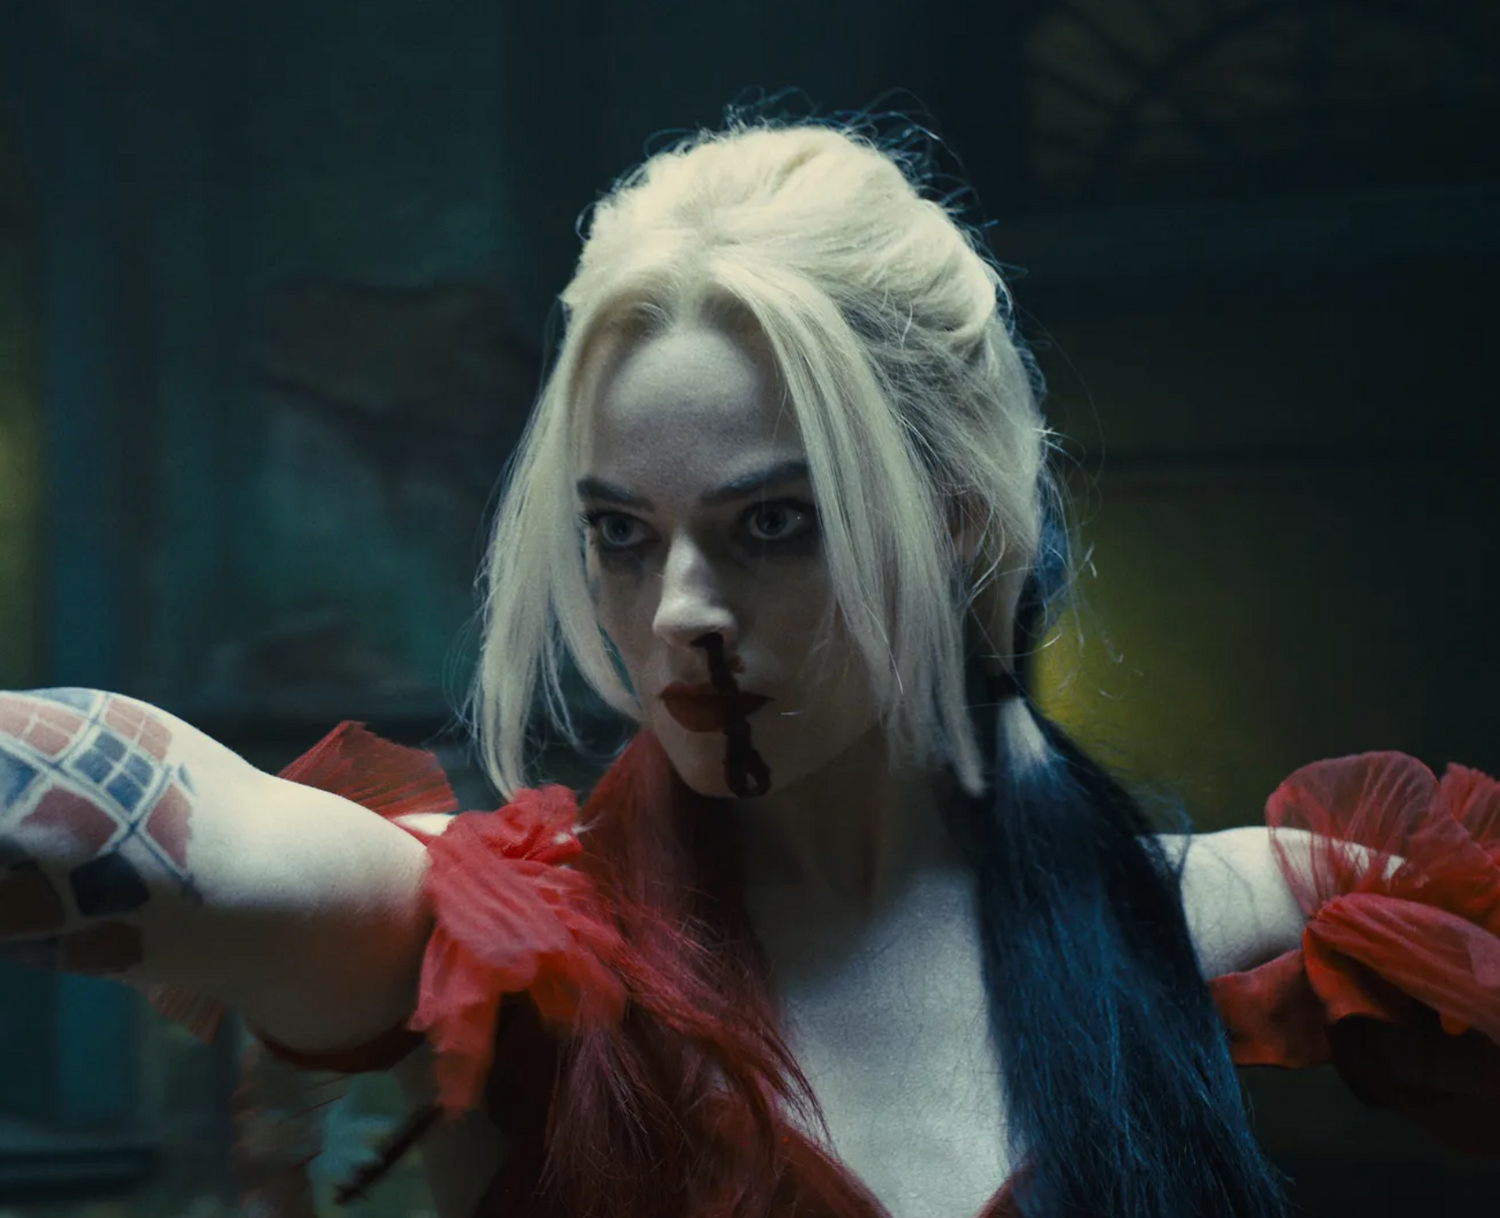 The Suicide Squad Makeup Artist Reveals the Exact Makeup Used on Harley Quinn